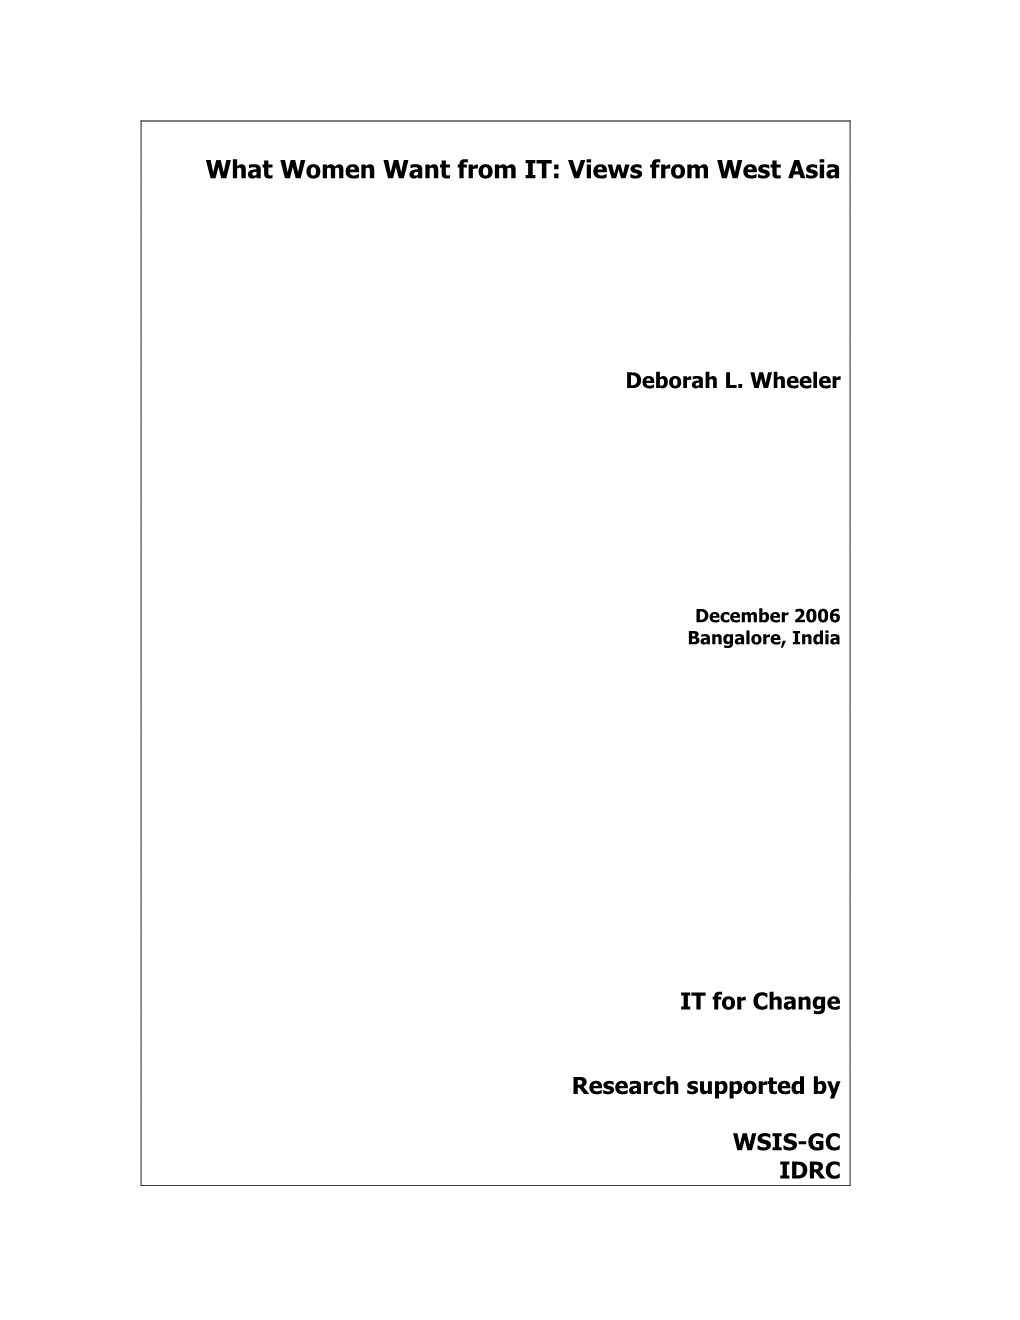 What Women Want from IT: Views from Western Asia